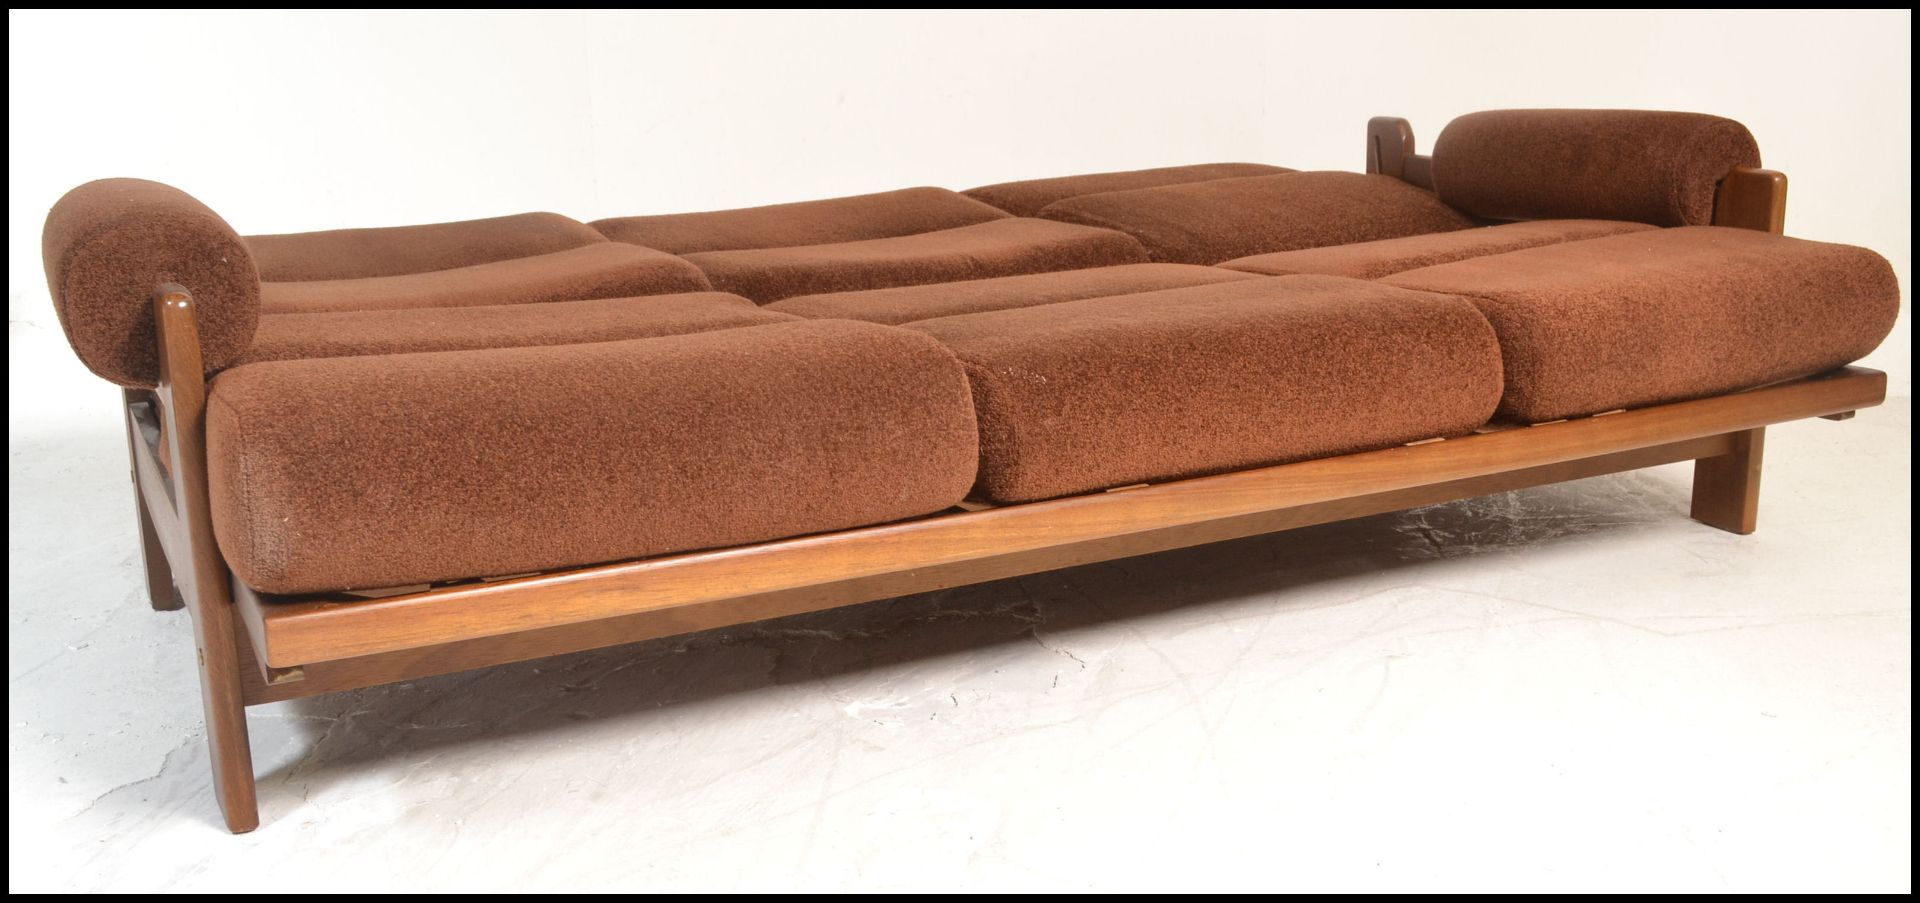 A retro 1960's Danish inspired teak wood day bed sofa. The turned legs supporting a fold down bed - Bild 5 aus 7